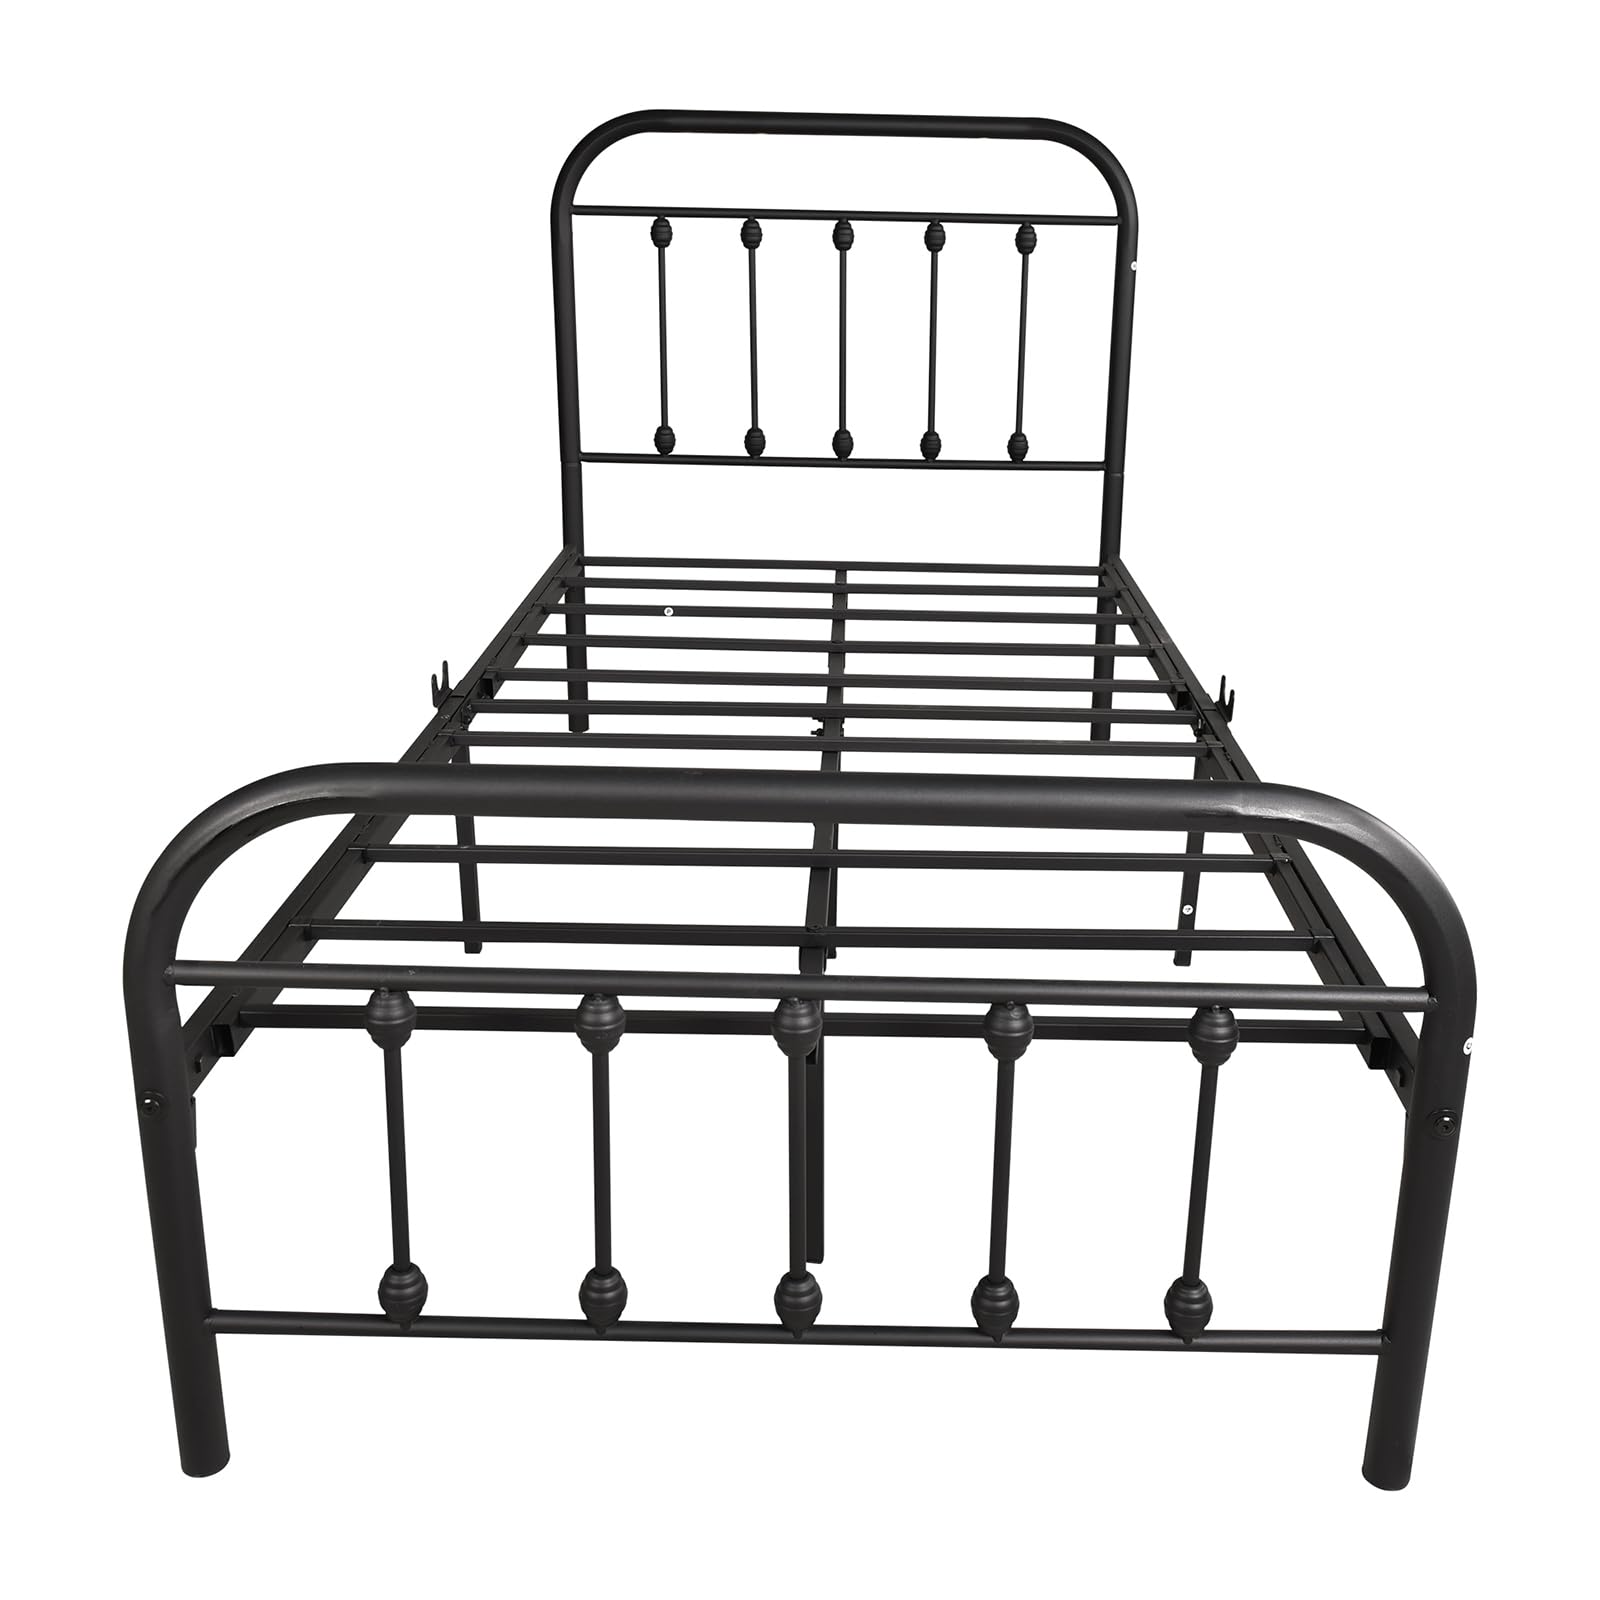 Metal Bed Frame, Twin Size Platform Bed Frame, Mattress Foundation with Headboard ＆ Footboard, Steel Slat Support/No Box Spring Needed (Twin)